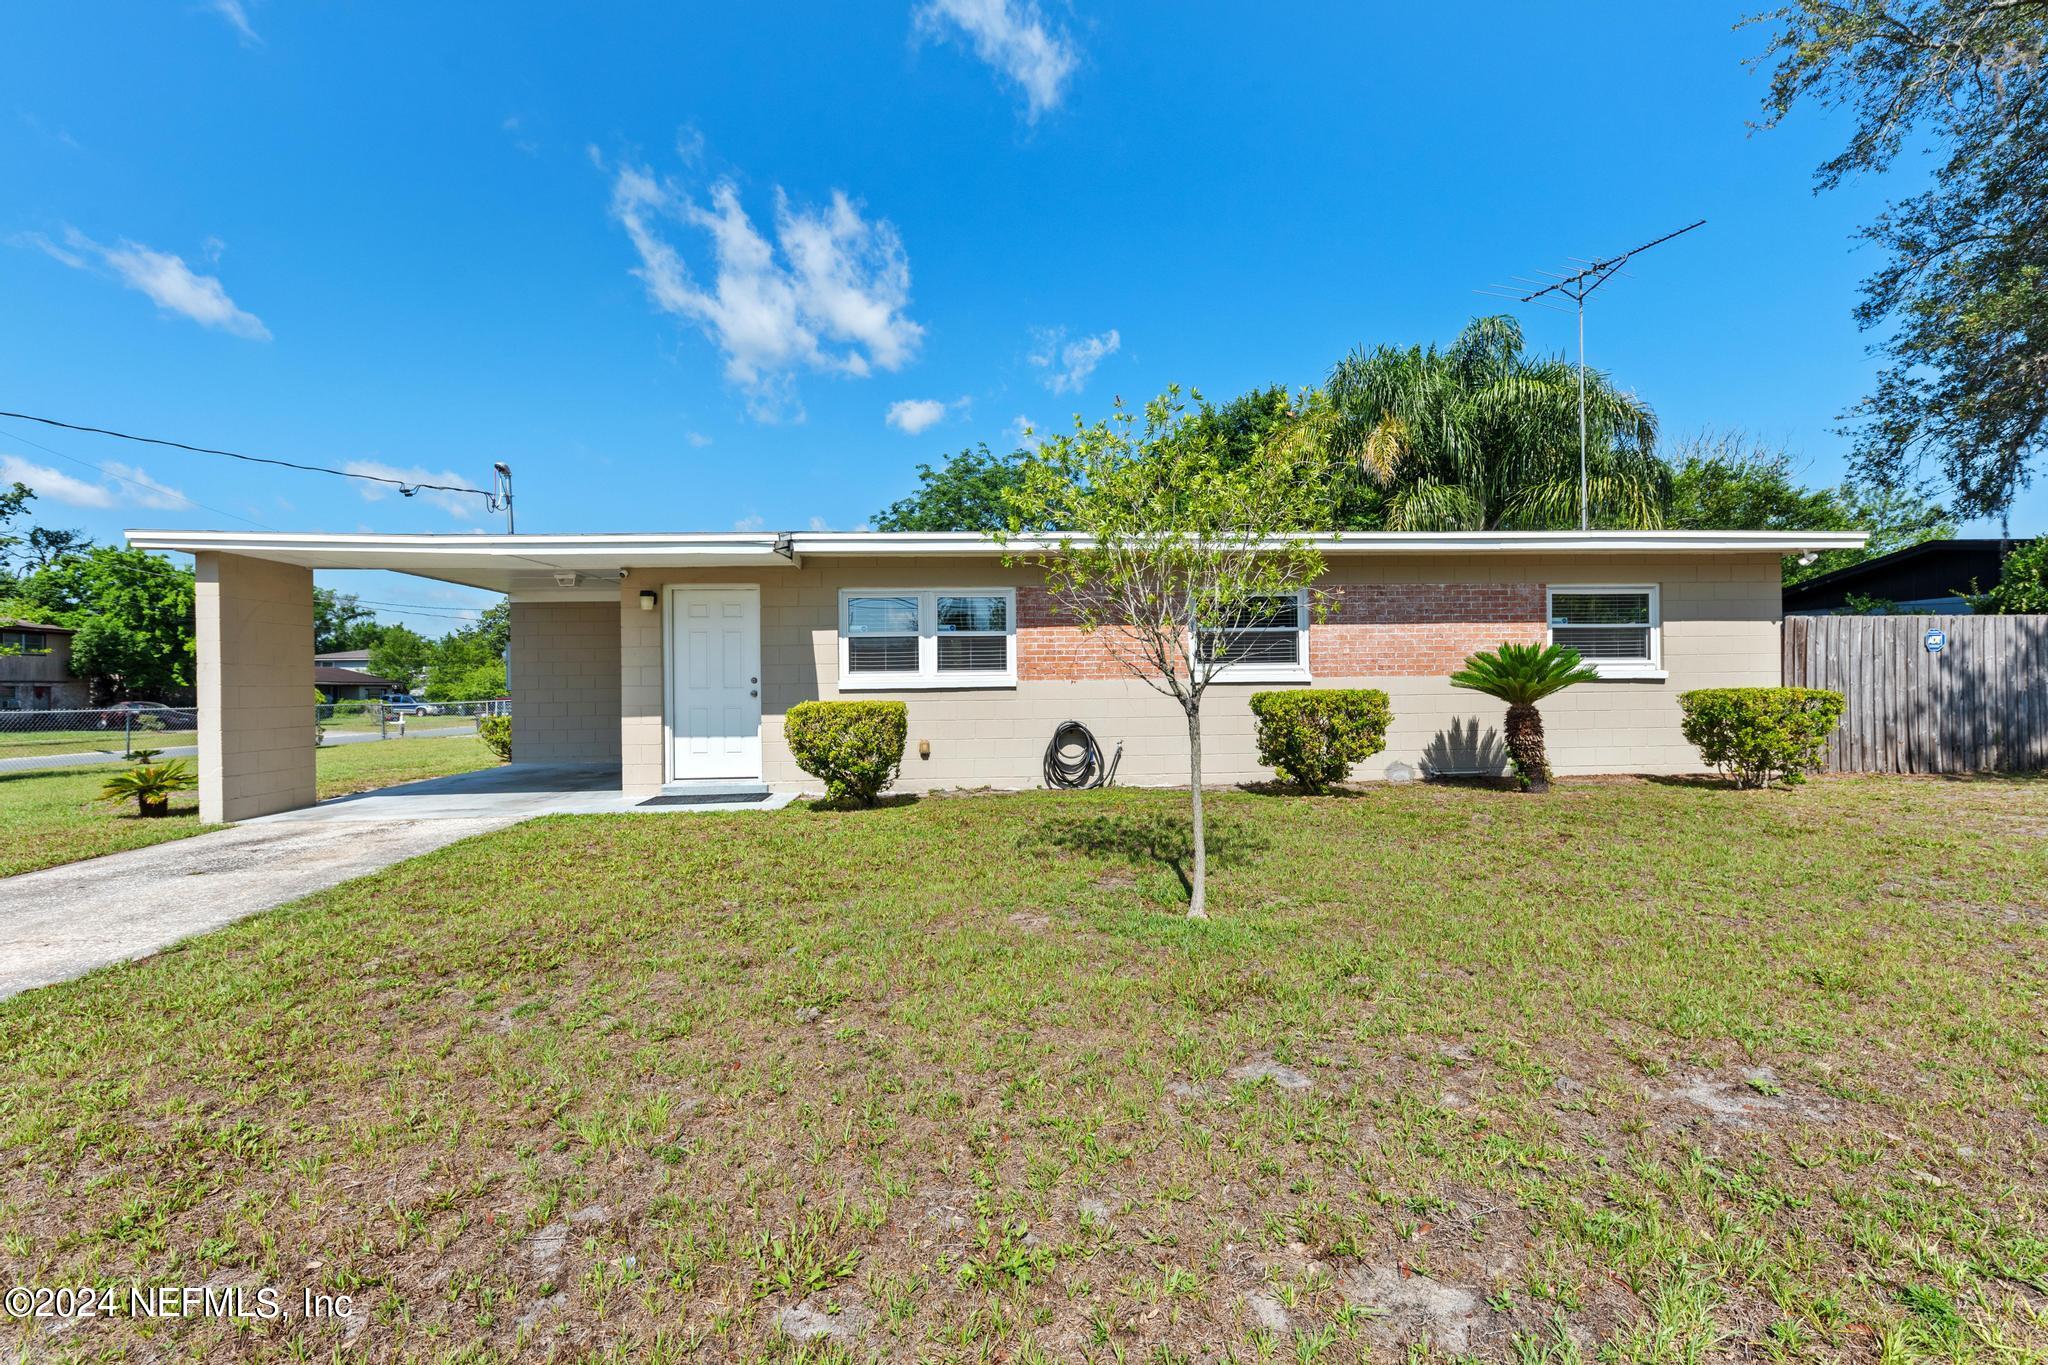 Jacksonville, FL home for sale located at 5756 Hillman Drive, Jacksonville, FL 32244